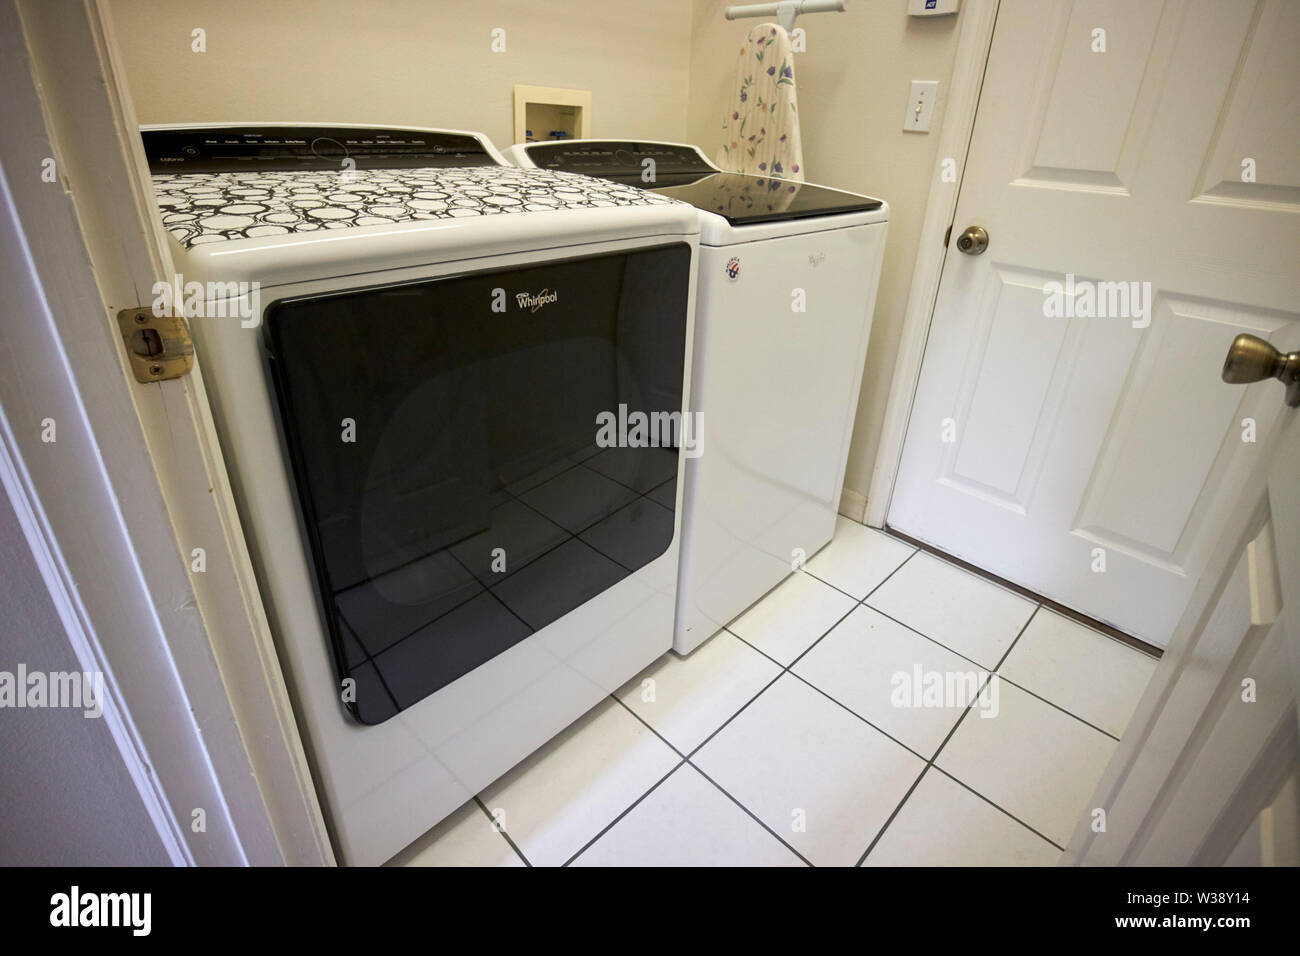 washer and dryer in the laundry room of a home in the USA United States of America Stock Photo